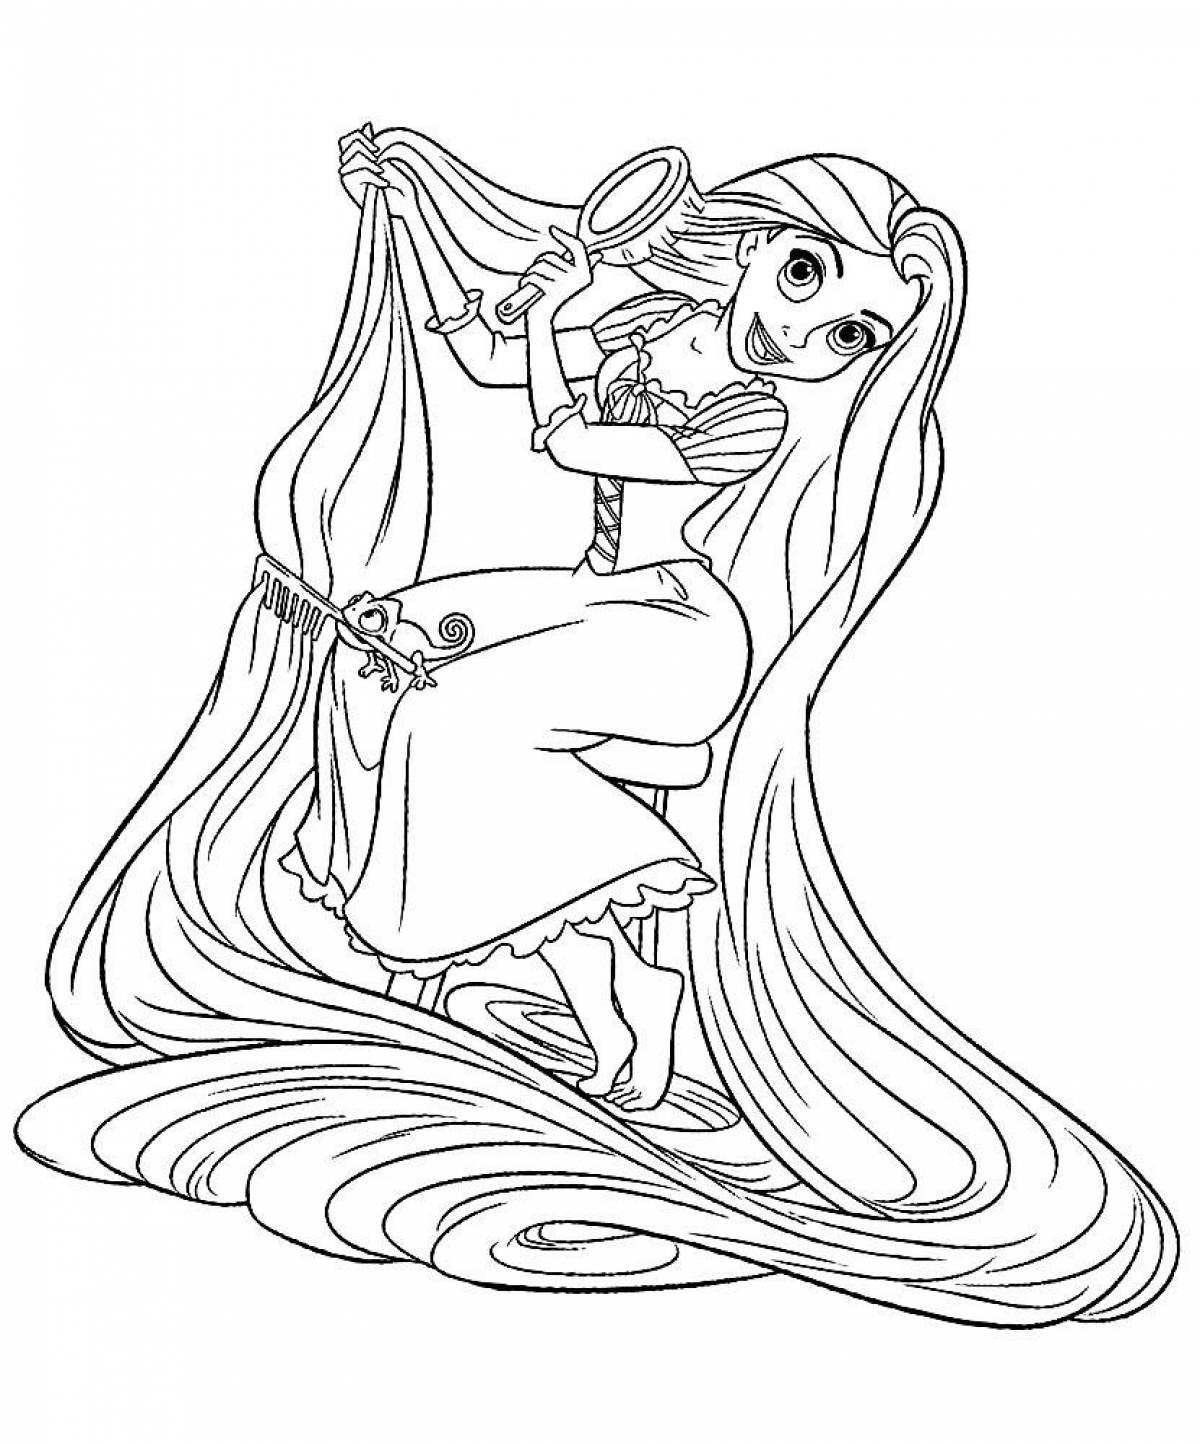 Exquisite rapunzel drawing coloring book